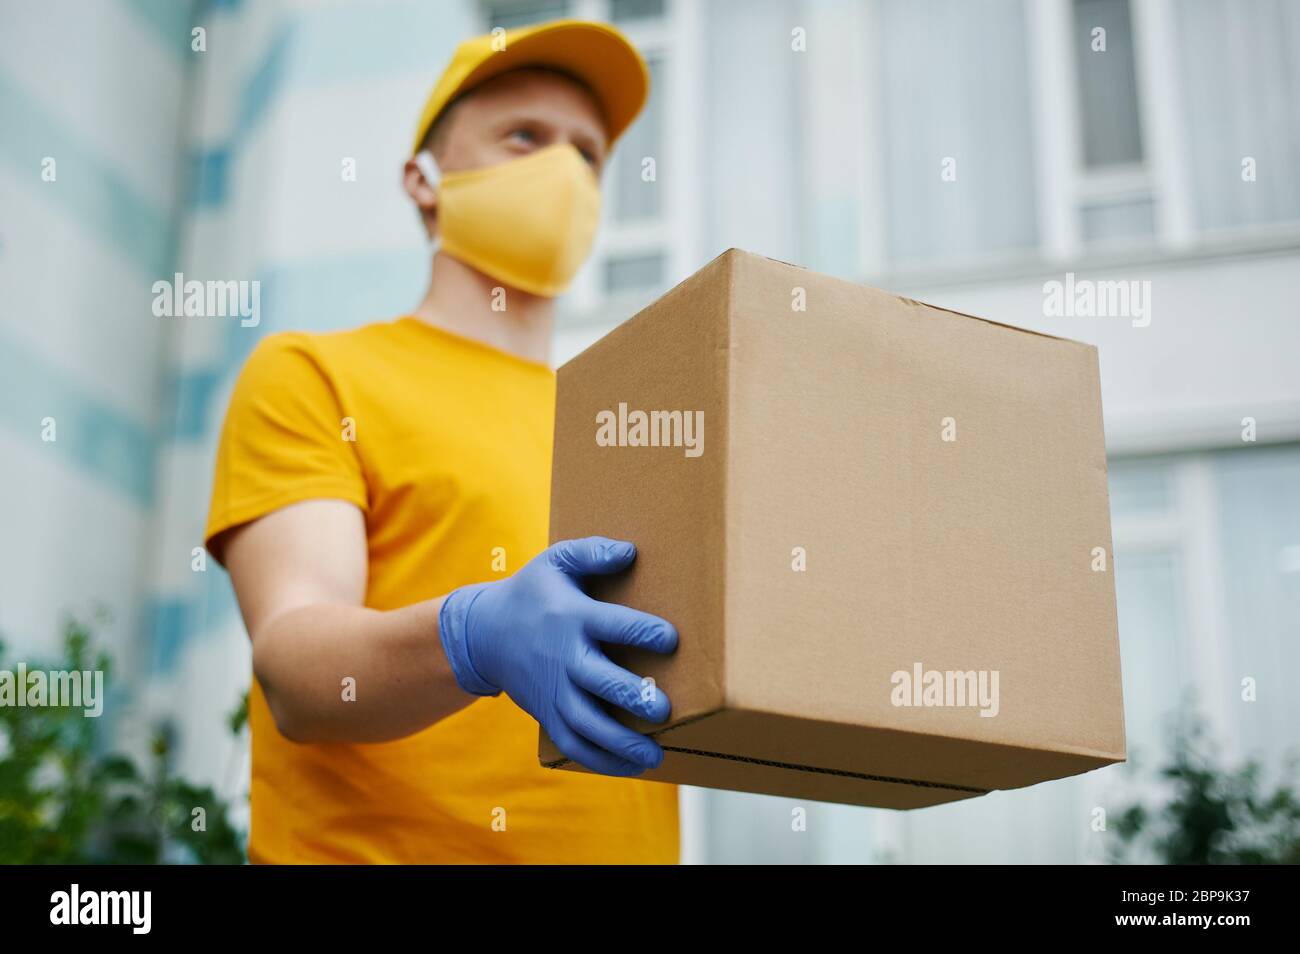 Delivery Man worker in yellow uniform cap, t-shirt, face mask and gloves holds a cardboard box package on building backdrop. Safety delivery quarantin Stock Photo